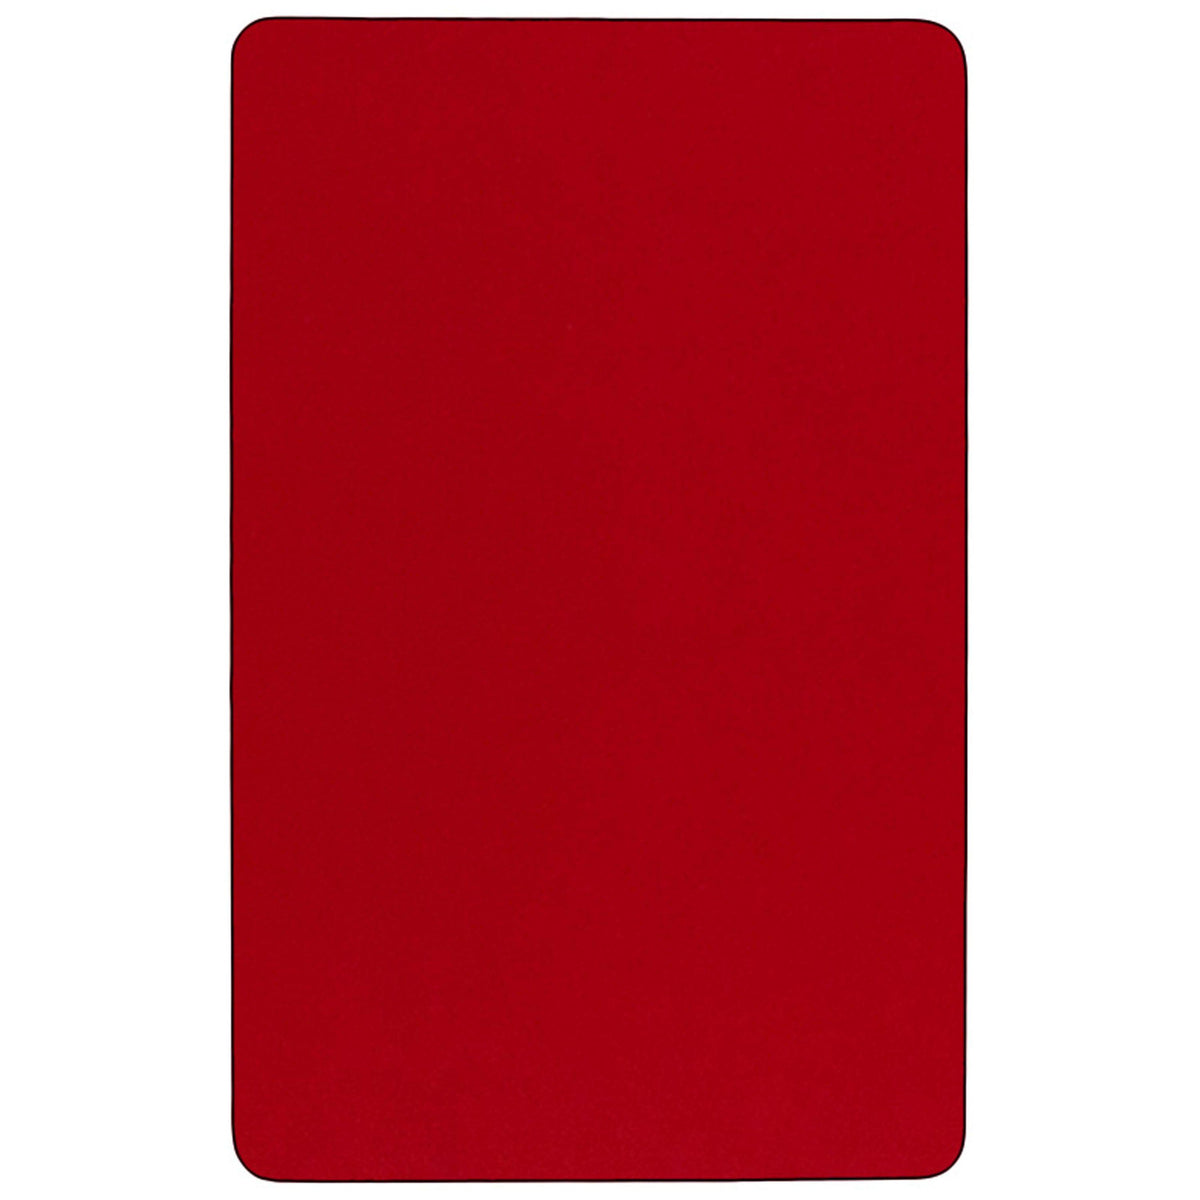 Red |#| 24inchW x 48inchL Rectangular Red Thermal Laminate Adjustable Activity Table